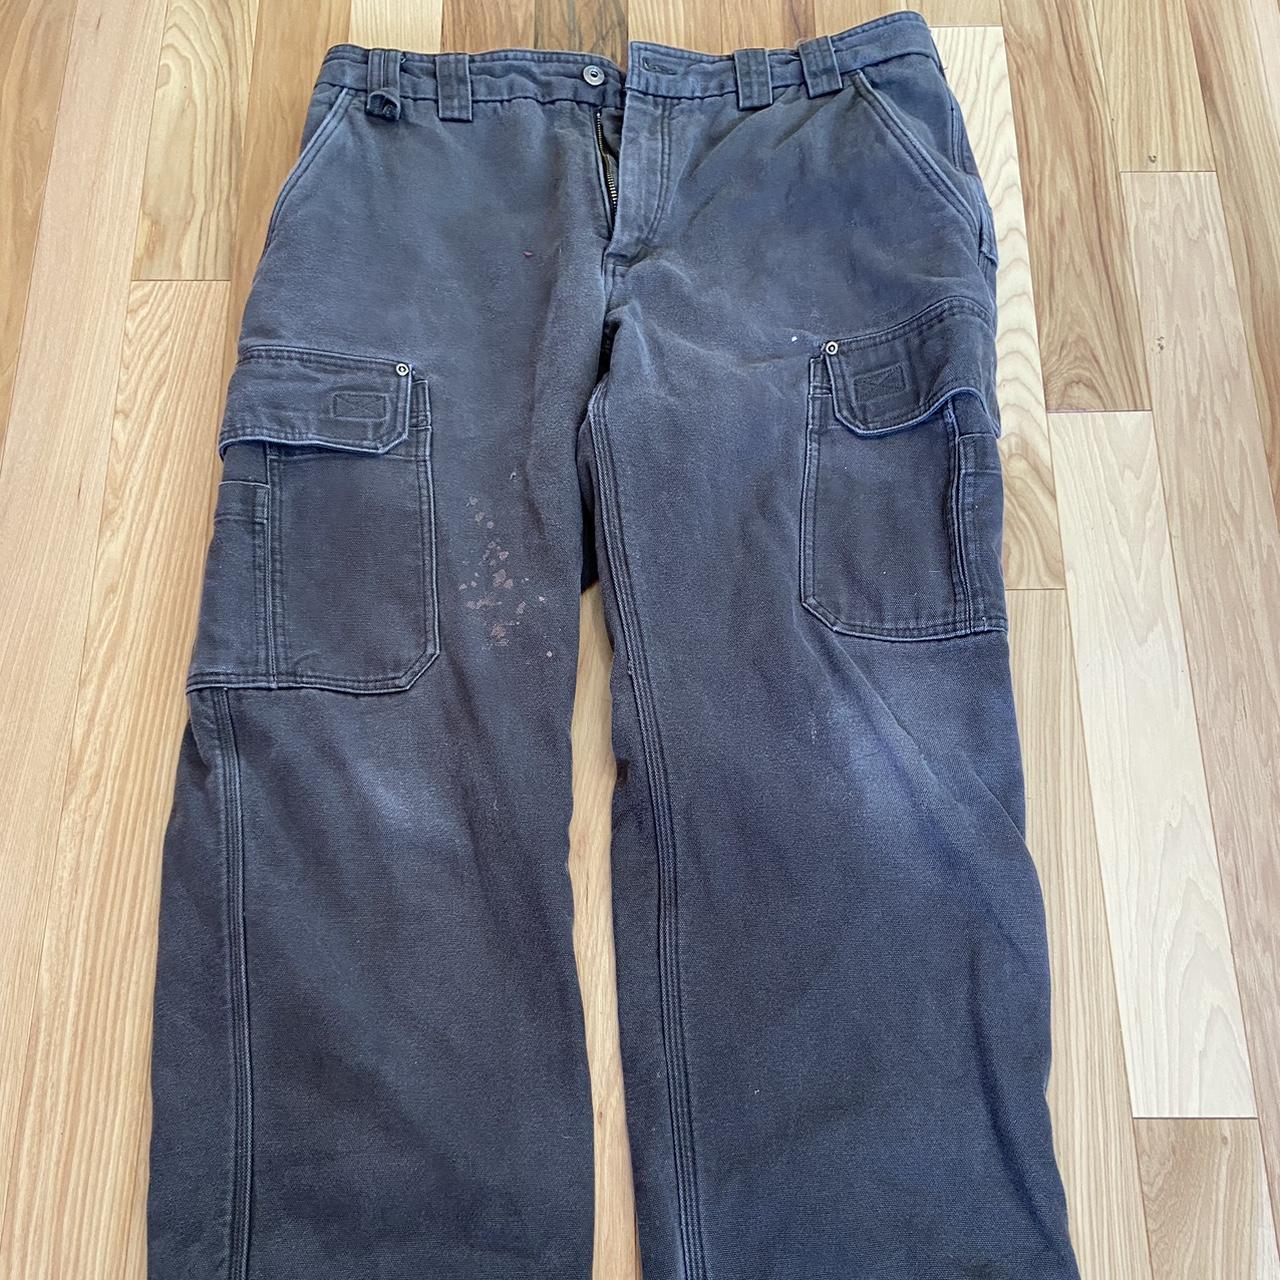 Duluth Trading Company Men's Trousers (2)